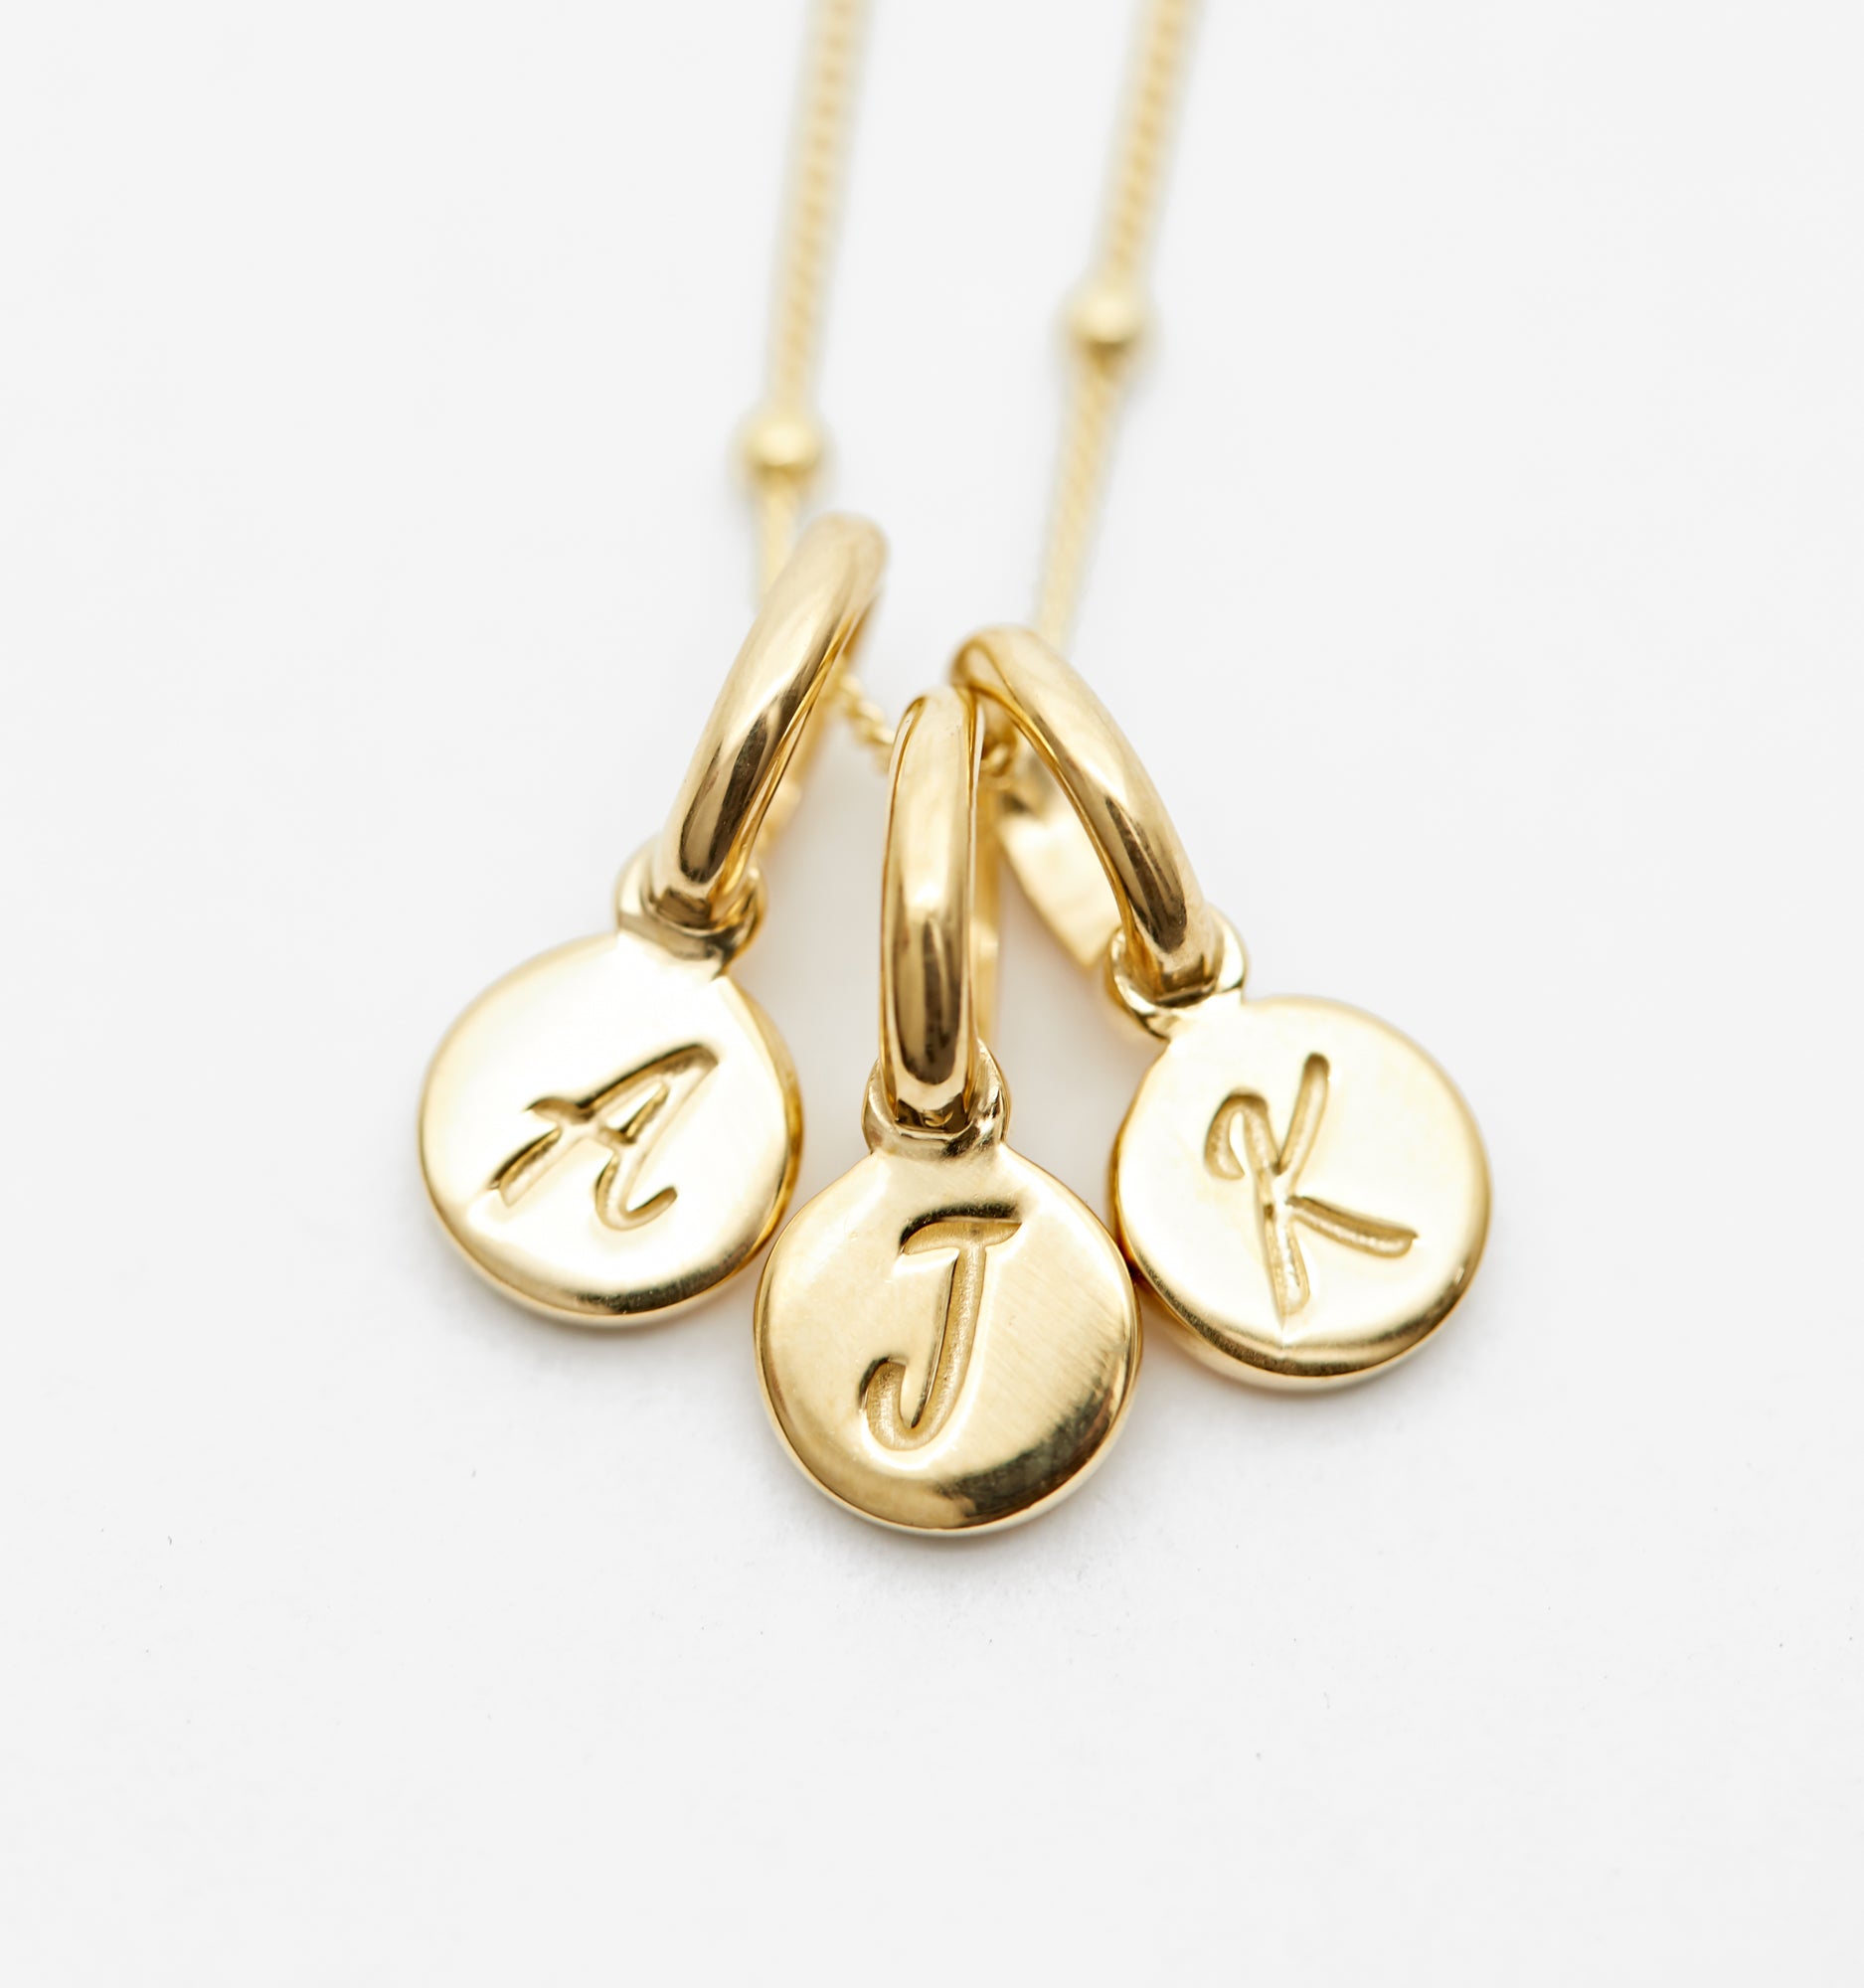 Gold Necklace Women - Saturn Gold Chain Necklace - 925 Sterling Silver - Rellery